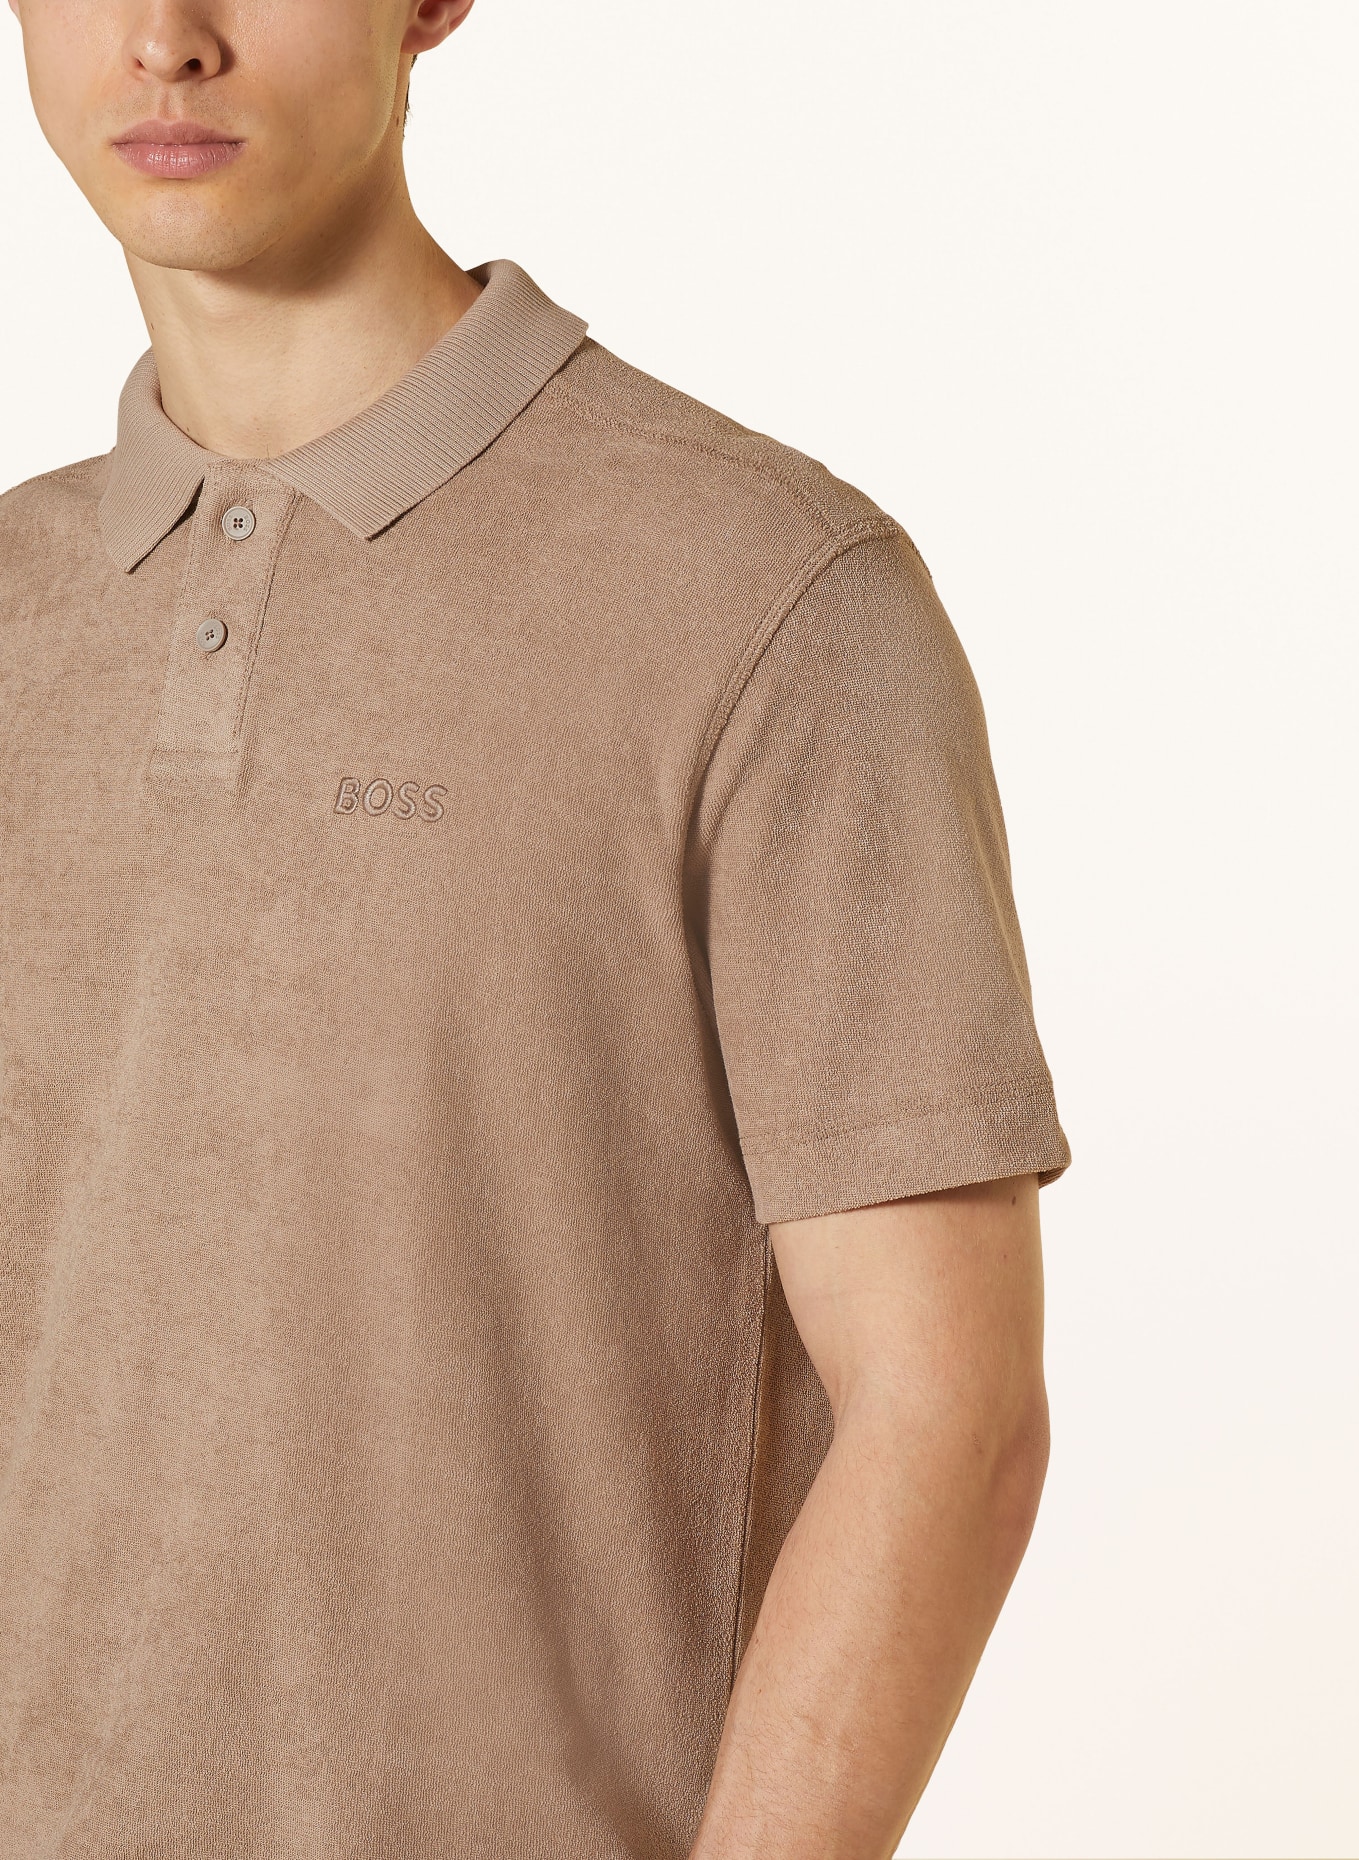 BOSS Terry polo shirt relaxed fit, Color: LIGHT BROWN (Image 4)